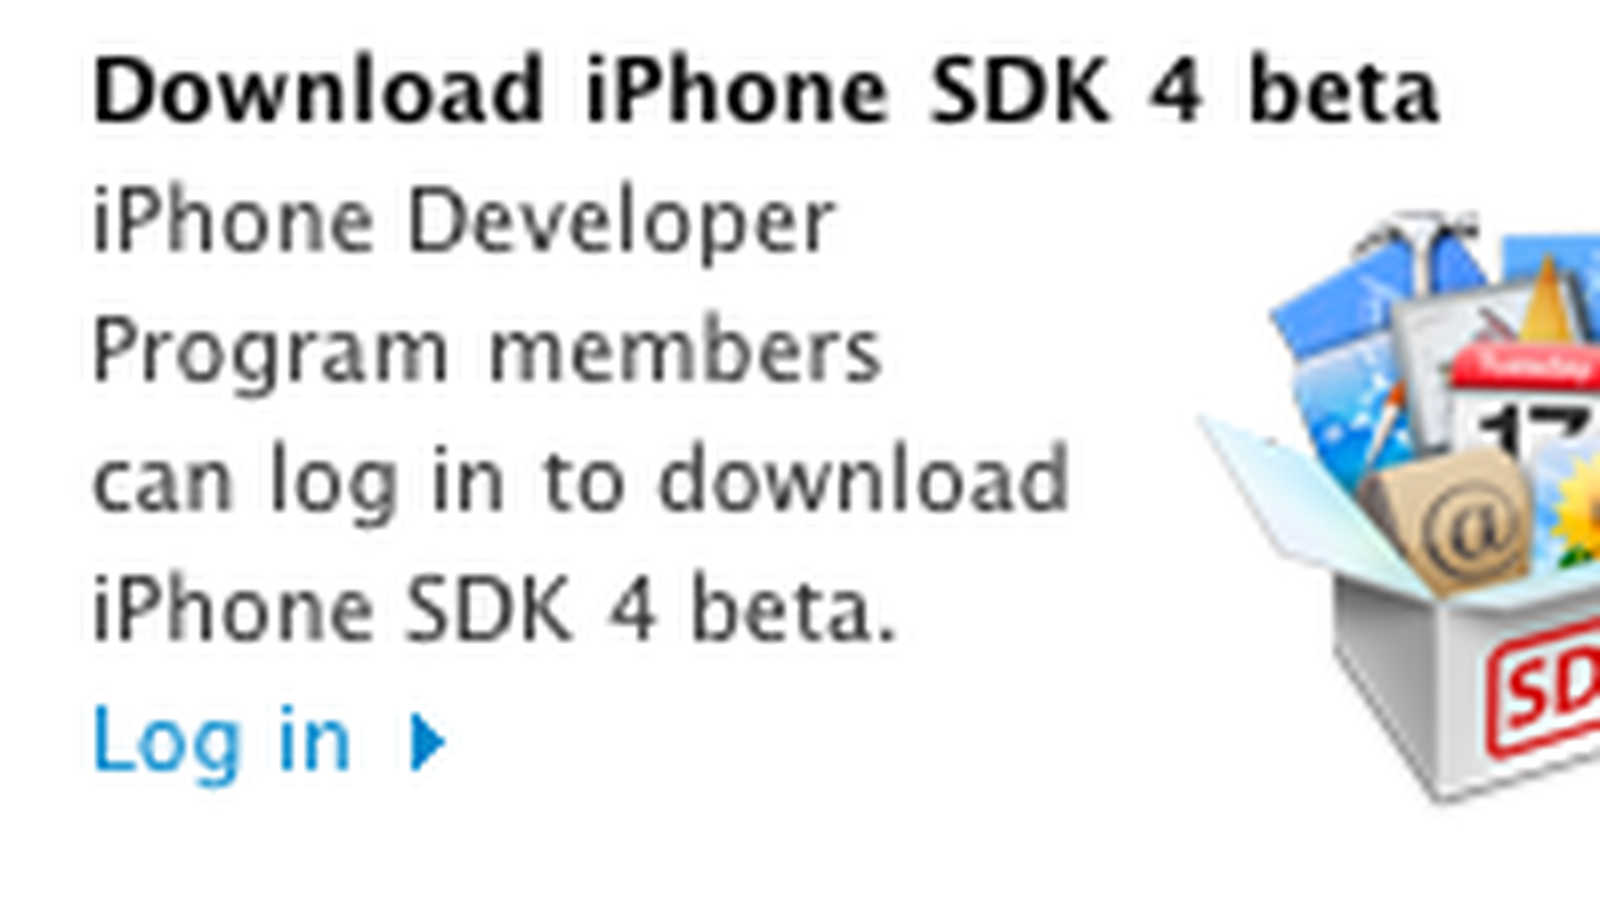 Apple Releases Iphone Os 4 Beta 3 And Sdk To Developers Updated Macrumors